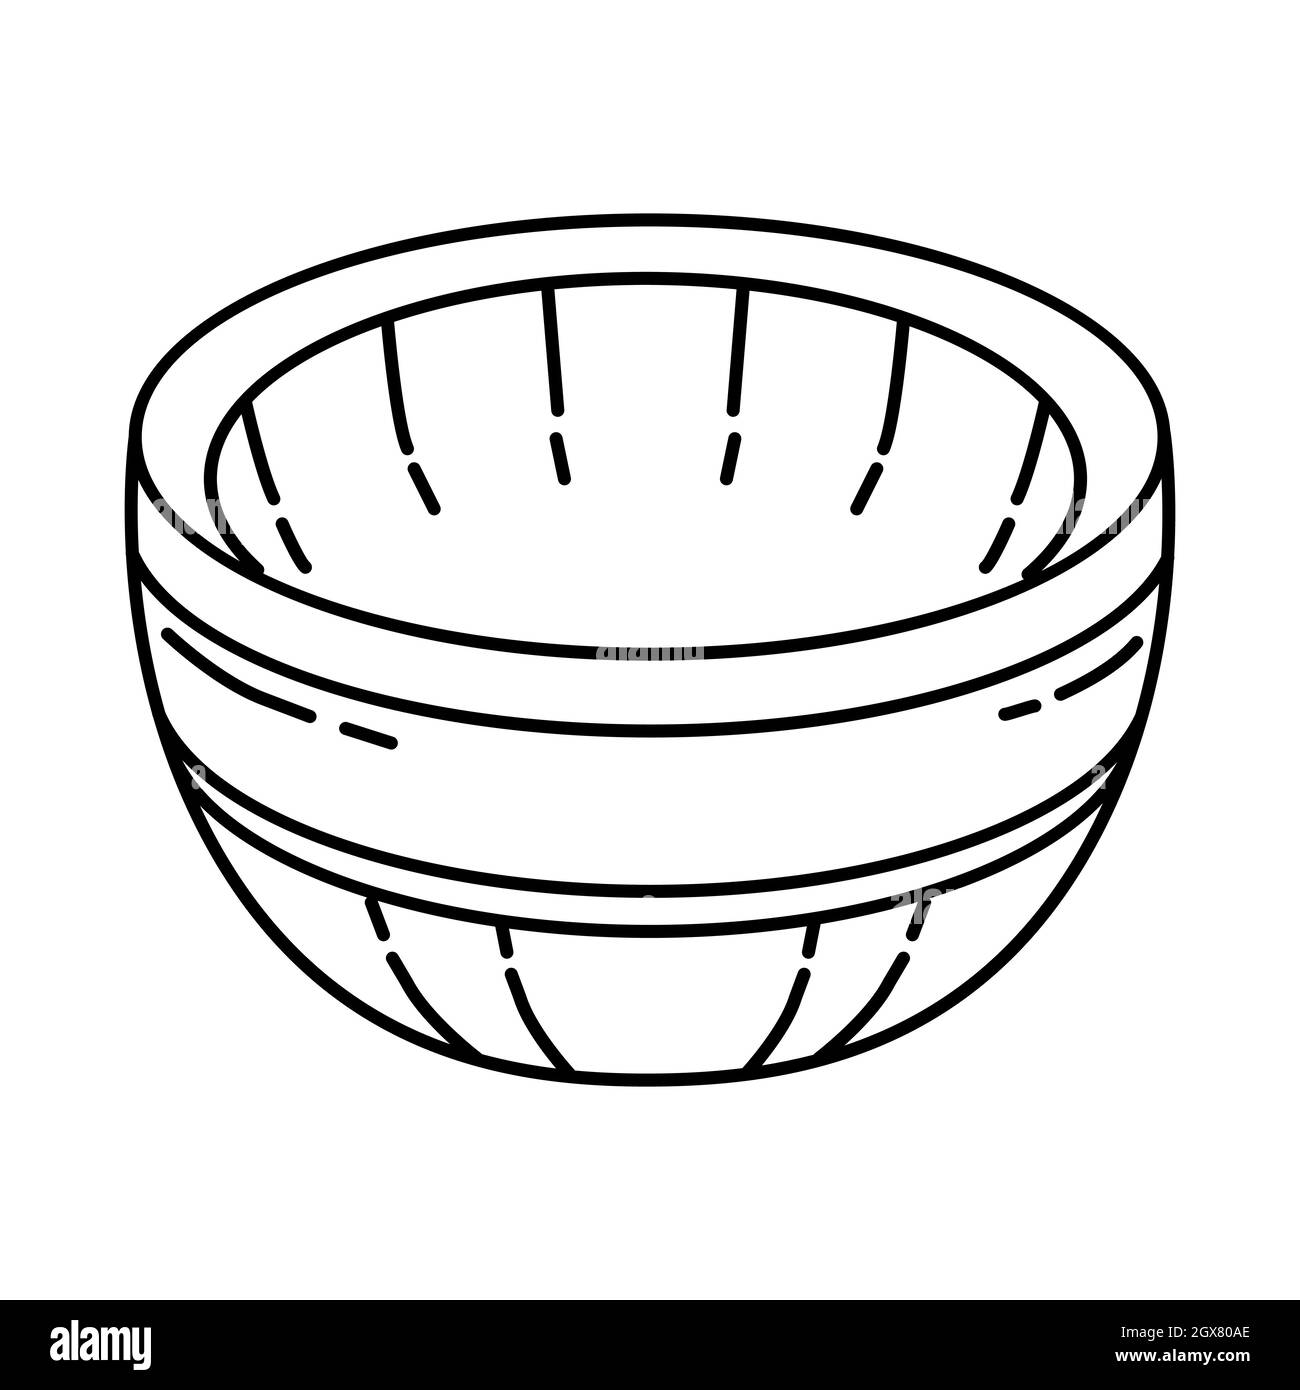 Prophet Muhammad s Bowl and Sacred Seal Part of Muslim historical objects Hand Drawn Icon Set Vector. Stock Vector